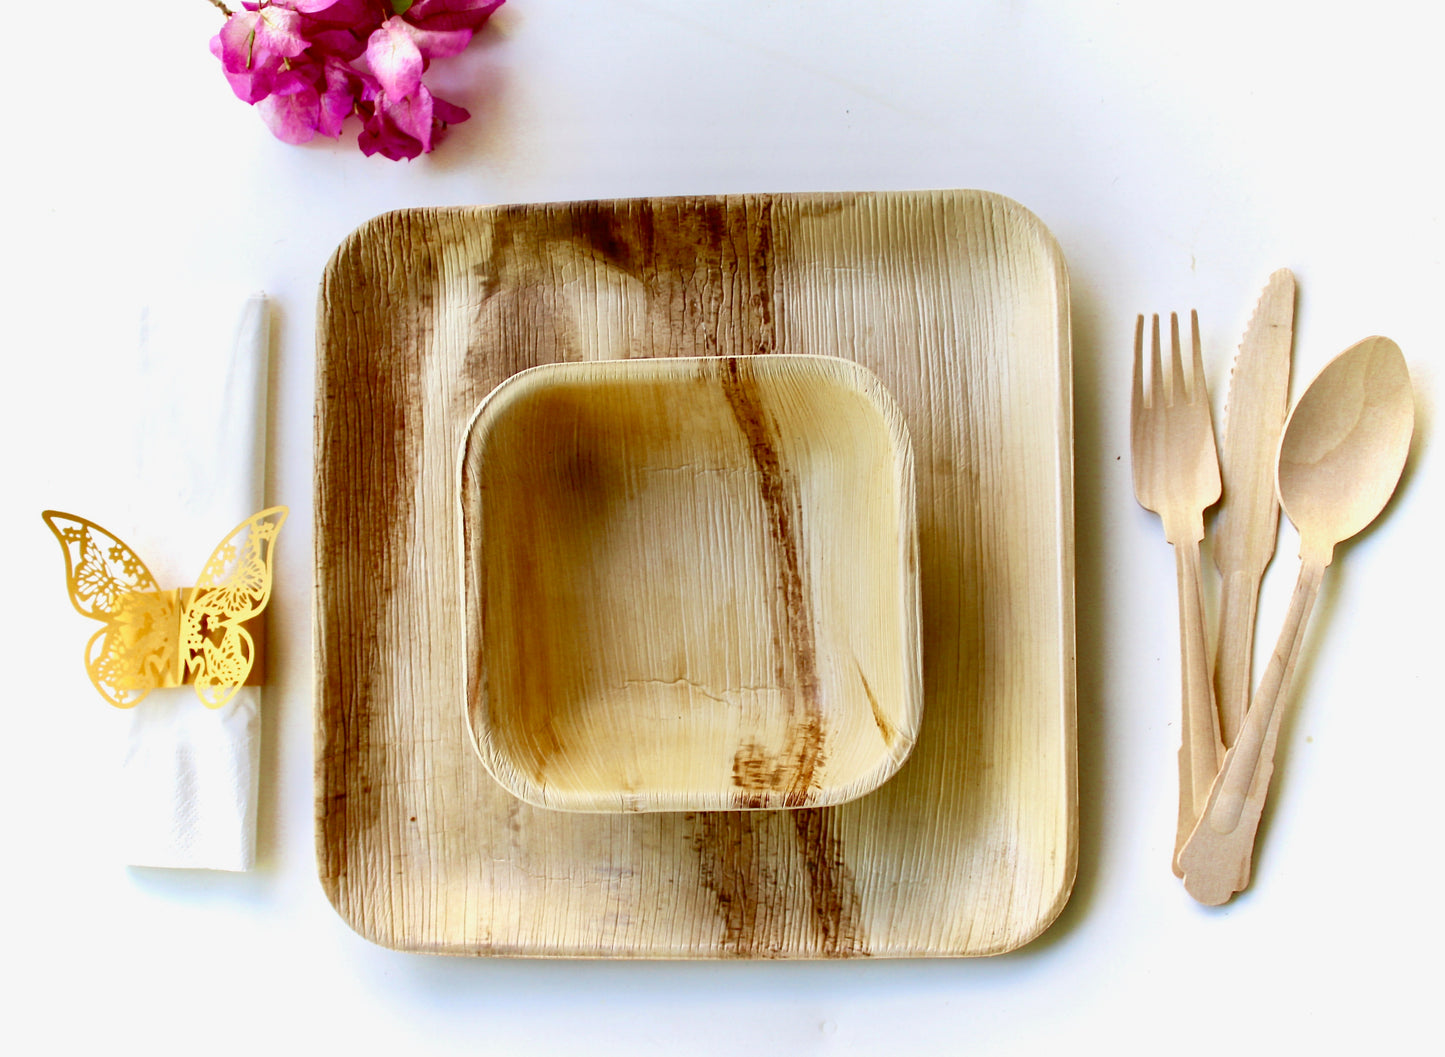 Palm leaf plate 25 pices deep Square 10"  - 25pic 6" square deep and 75 pic cutlery eco frindly - biodegrable - disposable - compostable